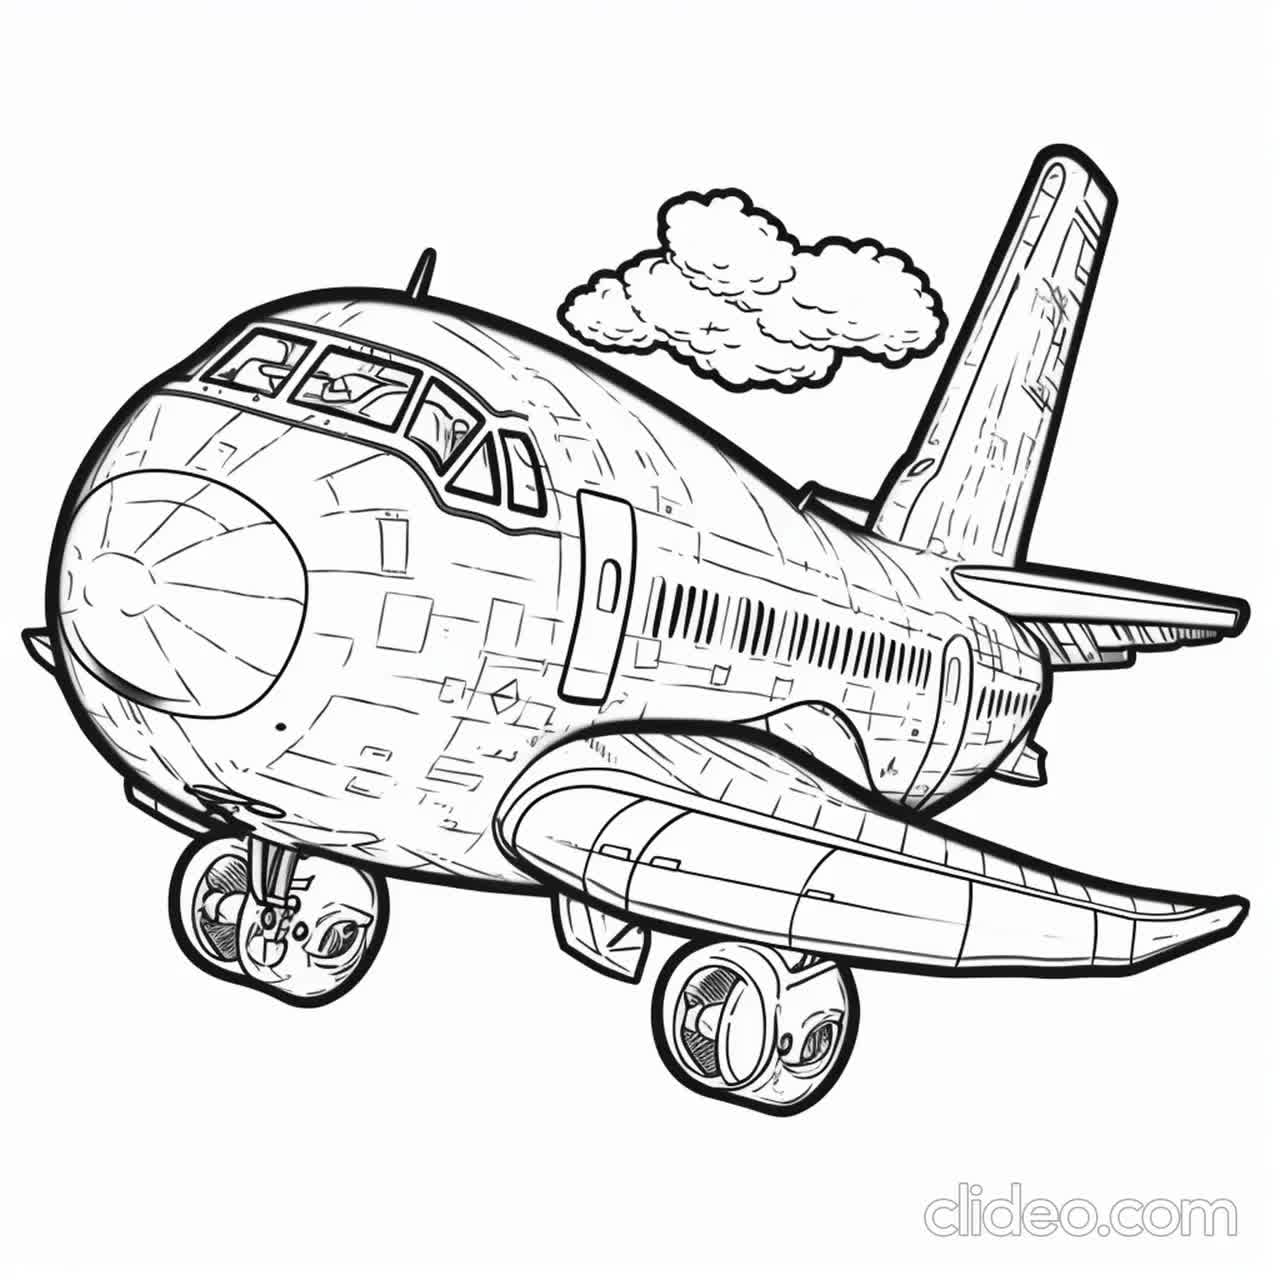 20 Jet Coloring Pages (Free PDF Printables)